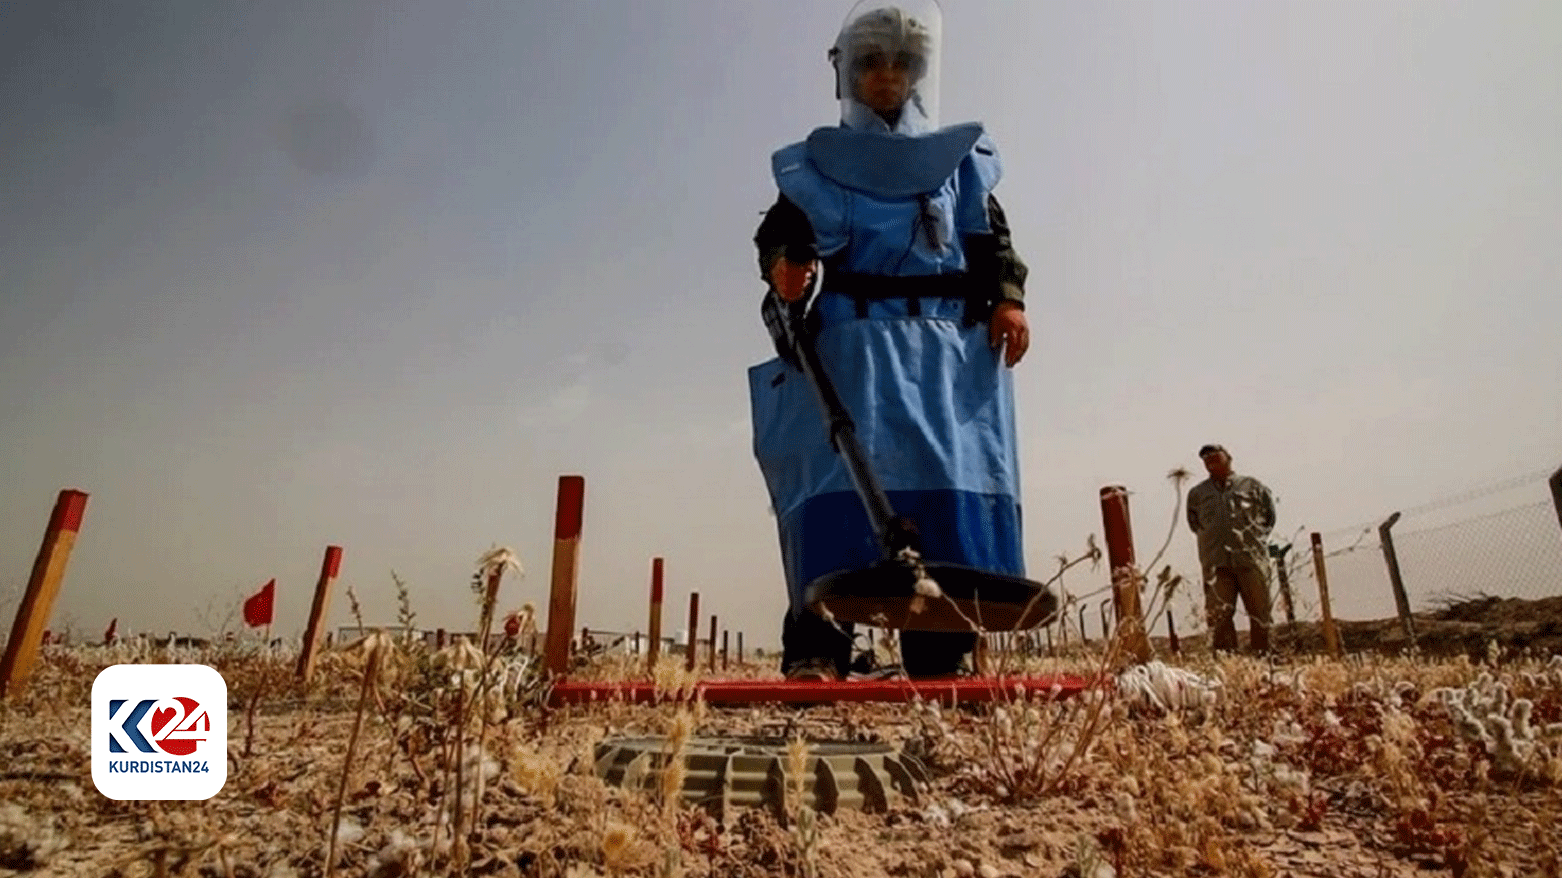 More than  square kilometers of Iraq planted with landmines